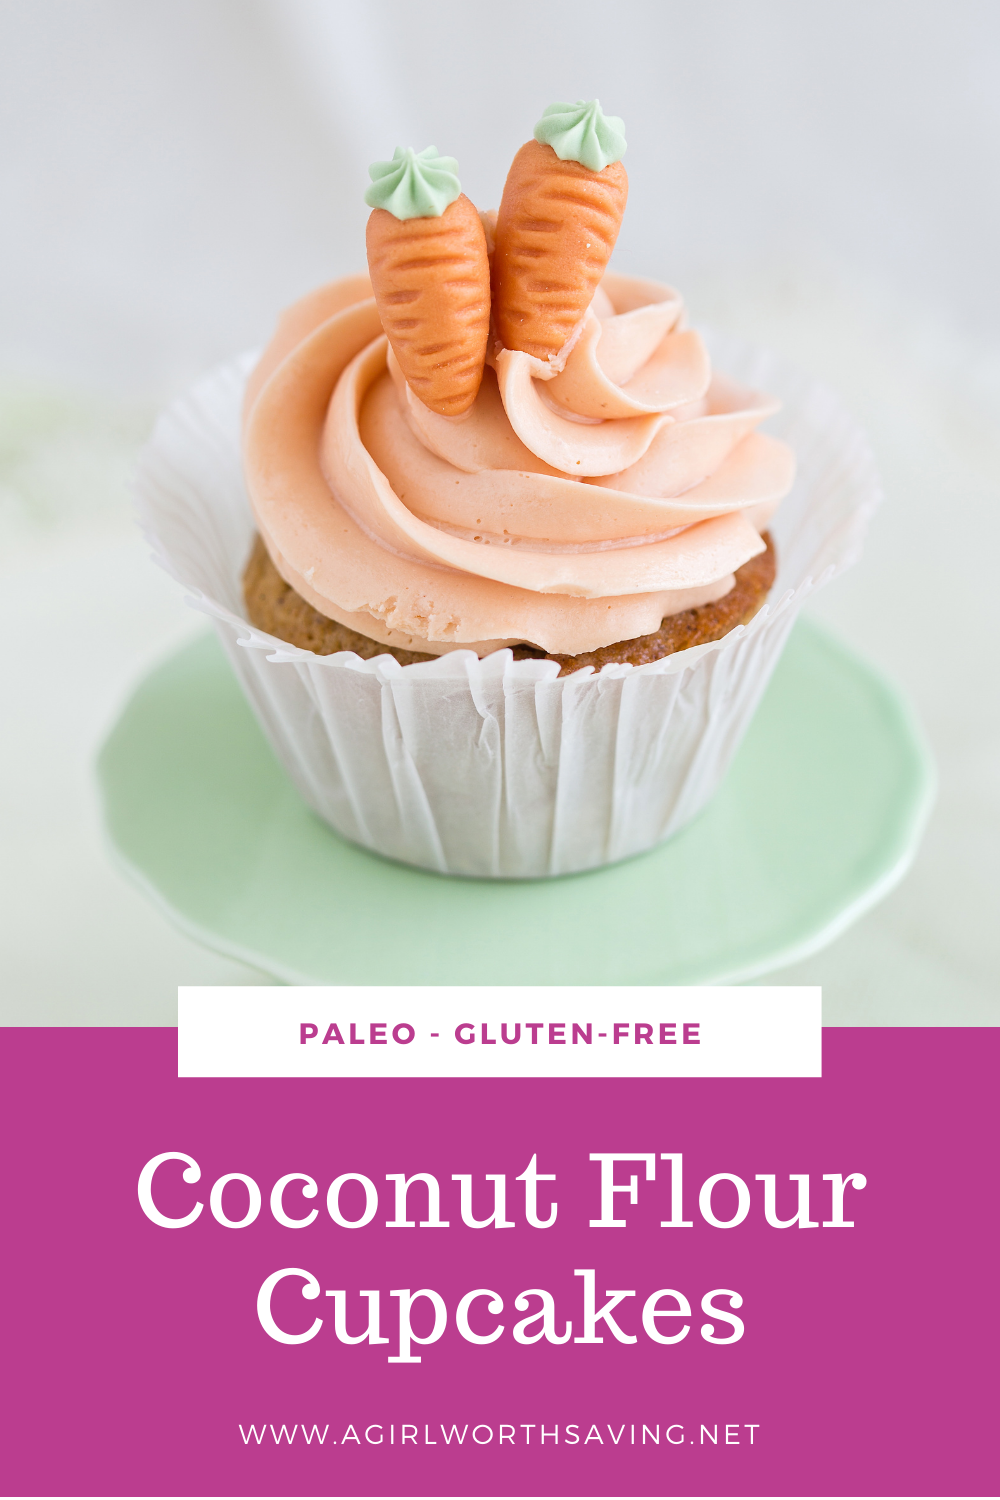 Looking for a healthy carrot cake recipe using coconut flour? These light and moist coconut flour carrot cupcakes are topped with a sweet cream cheese frosting.